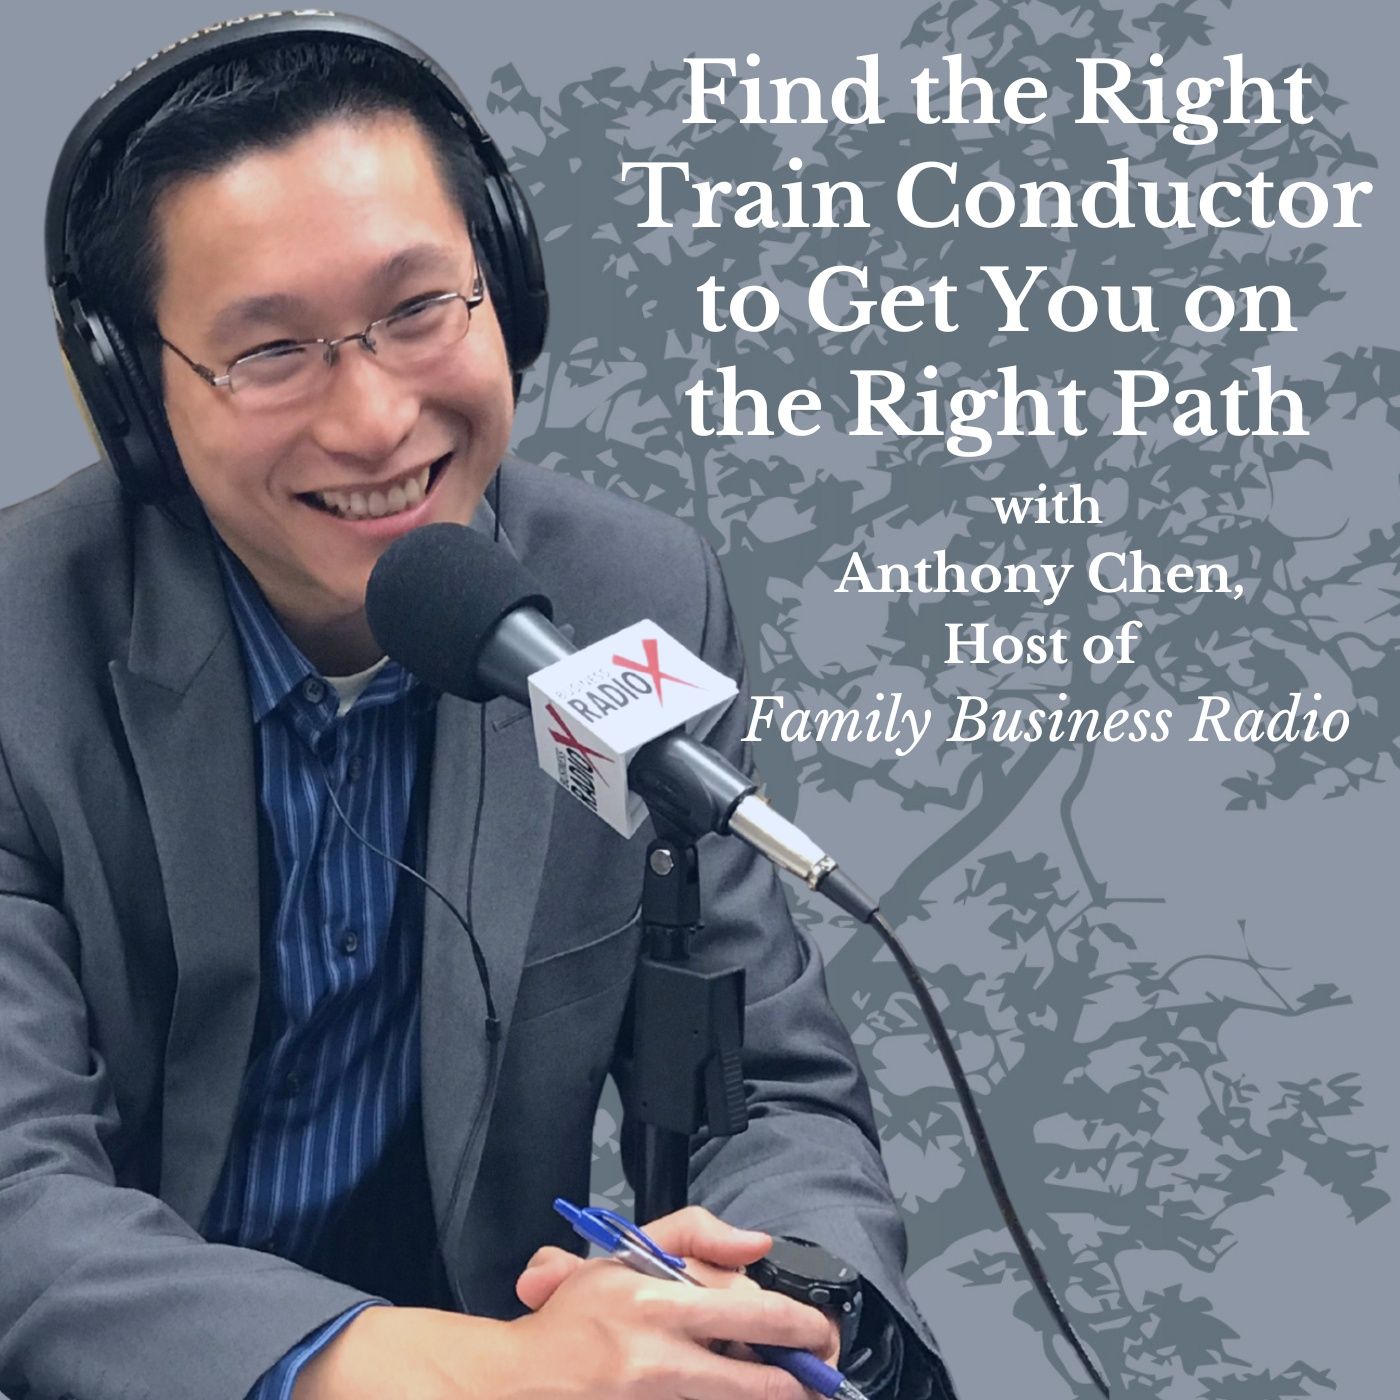 Find the Right Conductor for Your Financial Train, Host of Family Business Radio